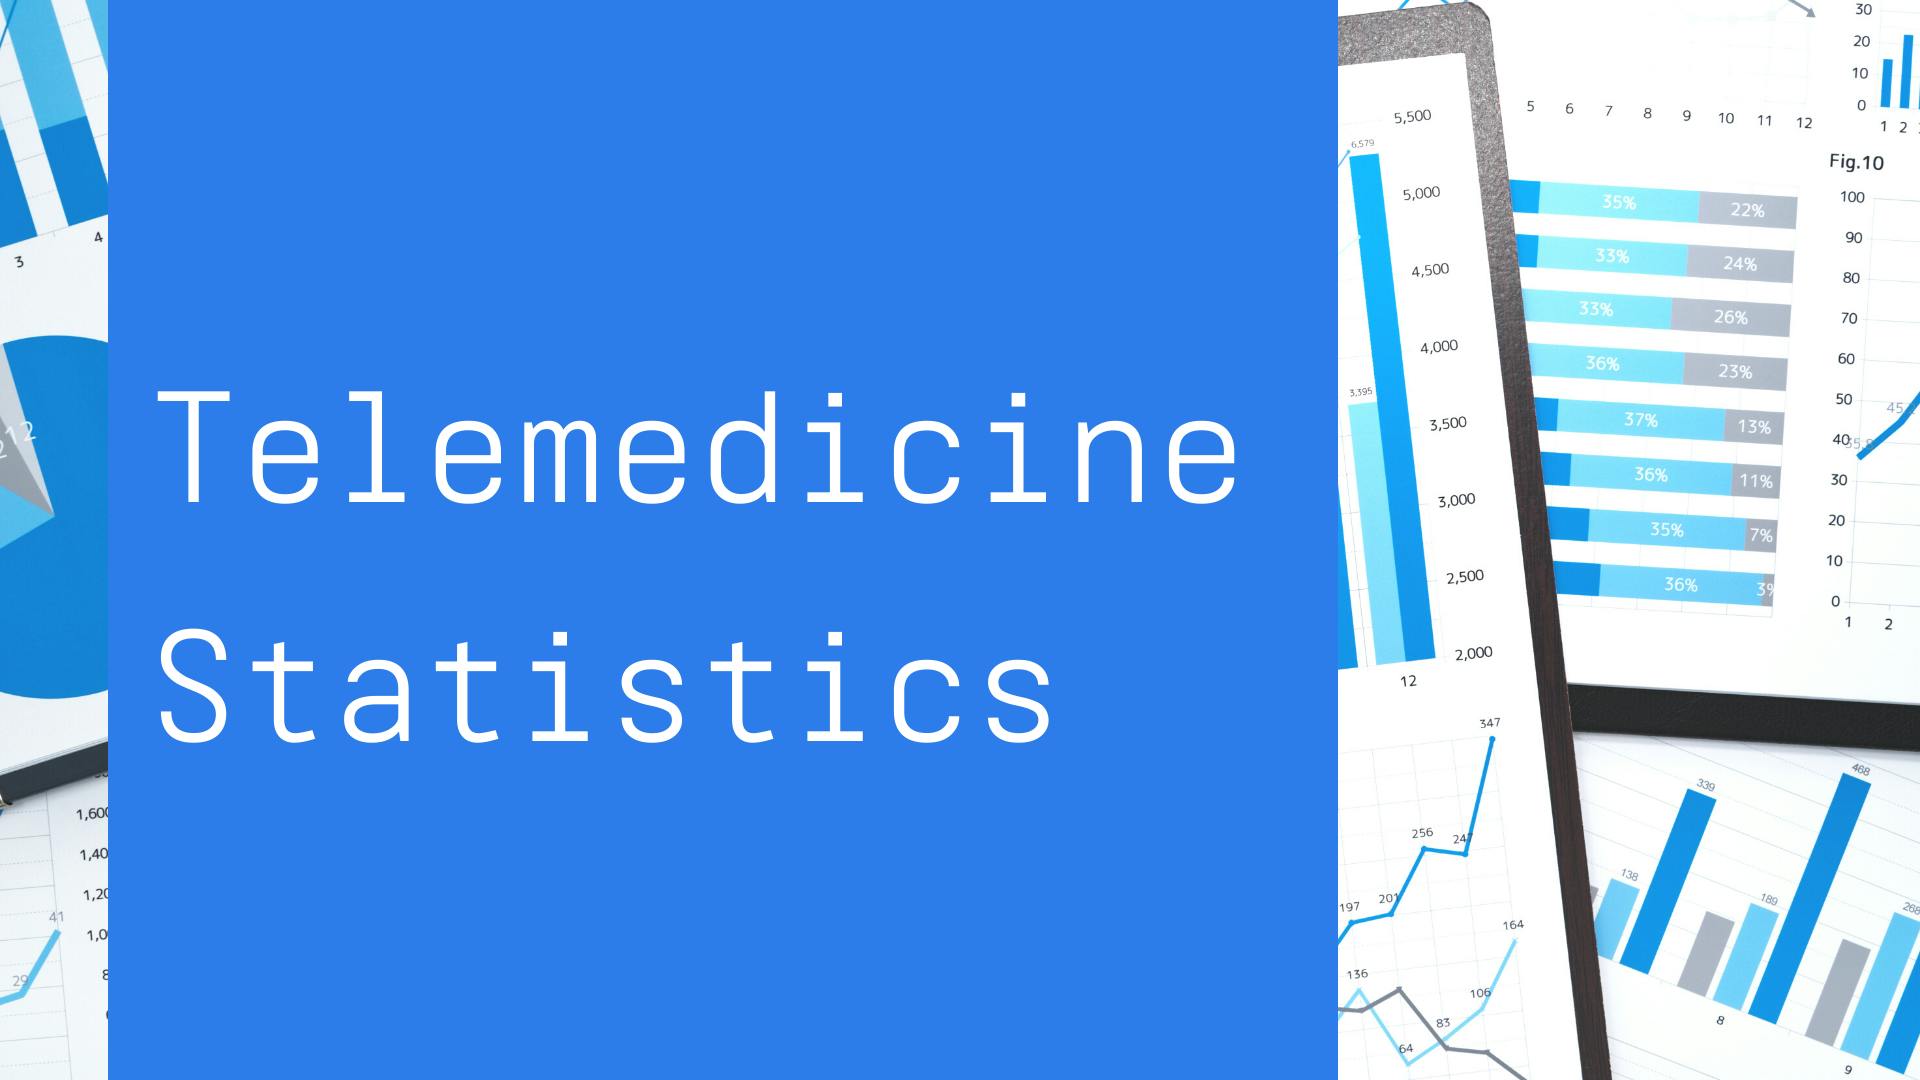 Telemedicine statistics - usage and growth in 2010